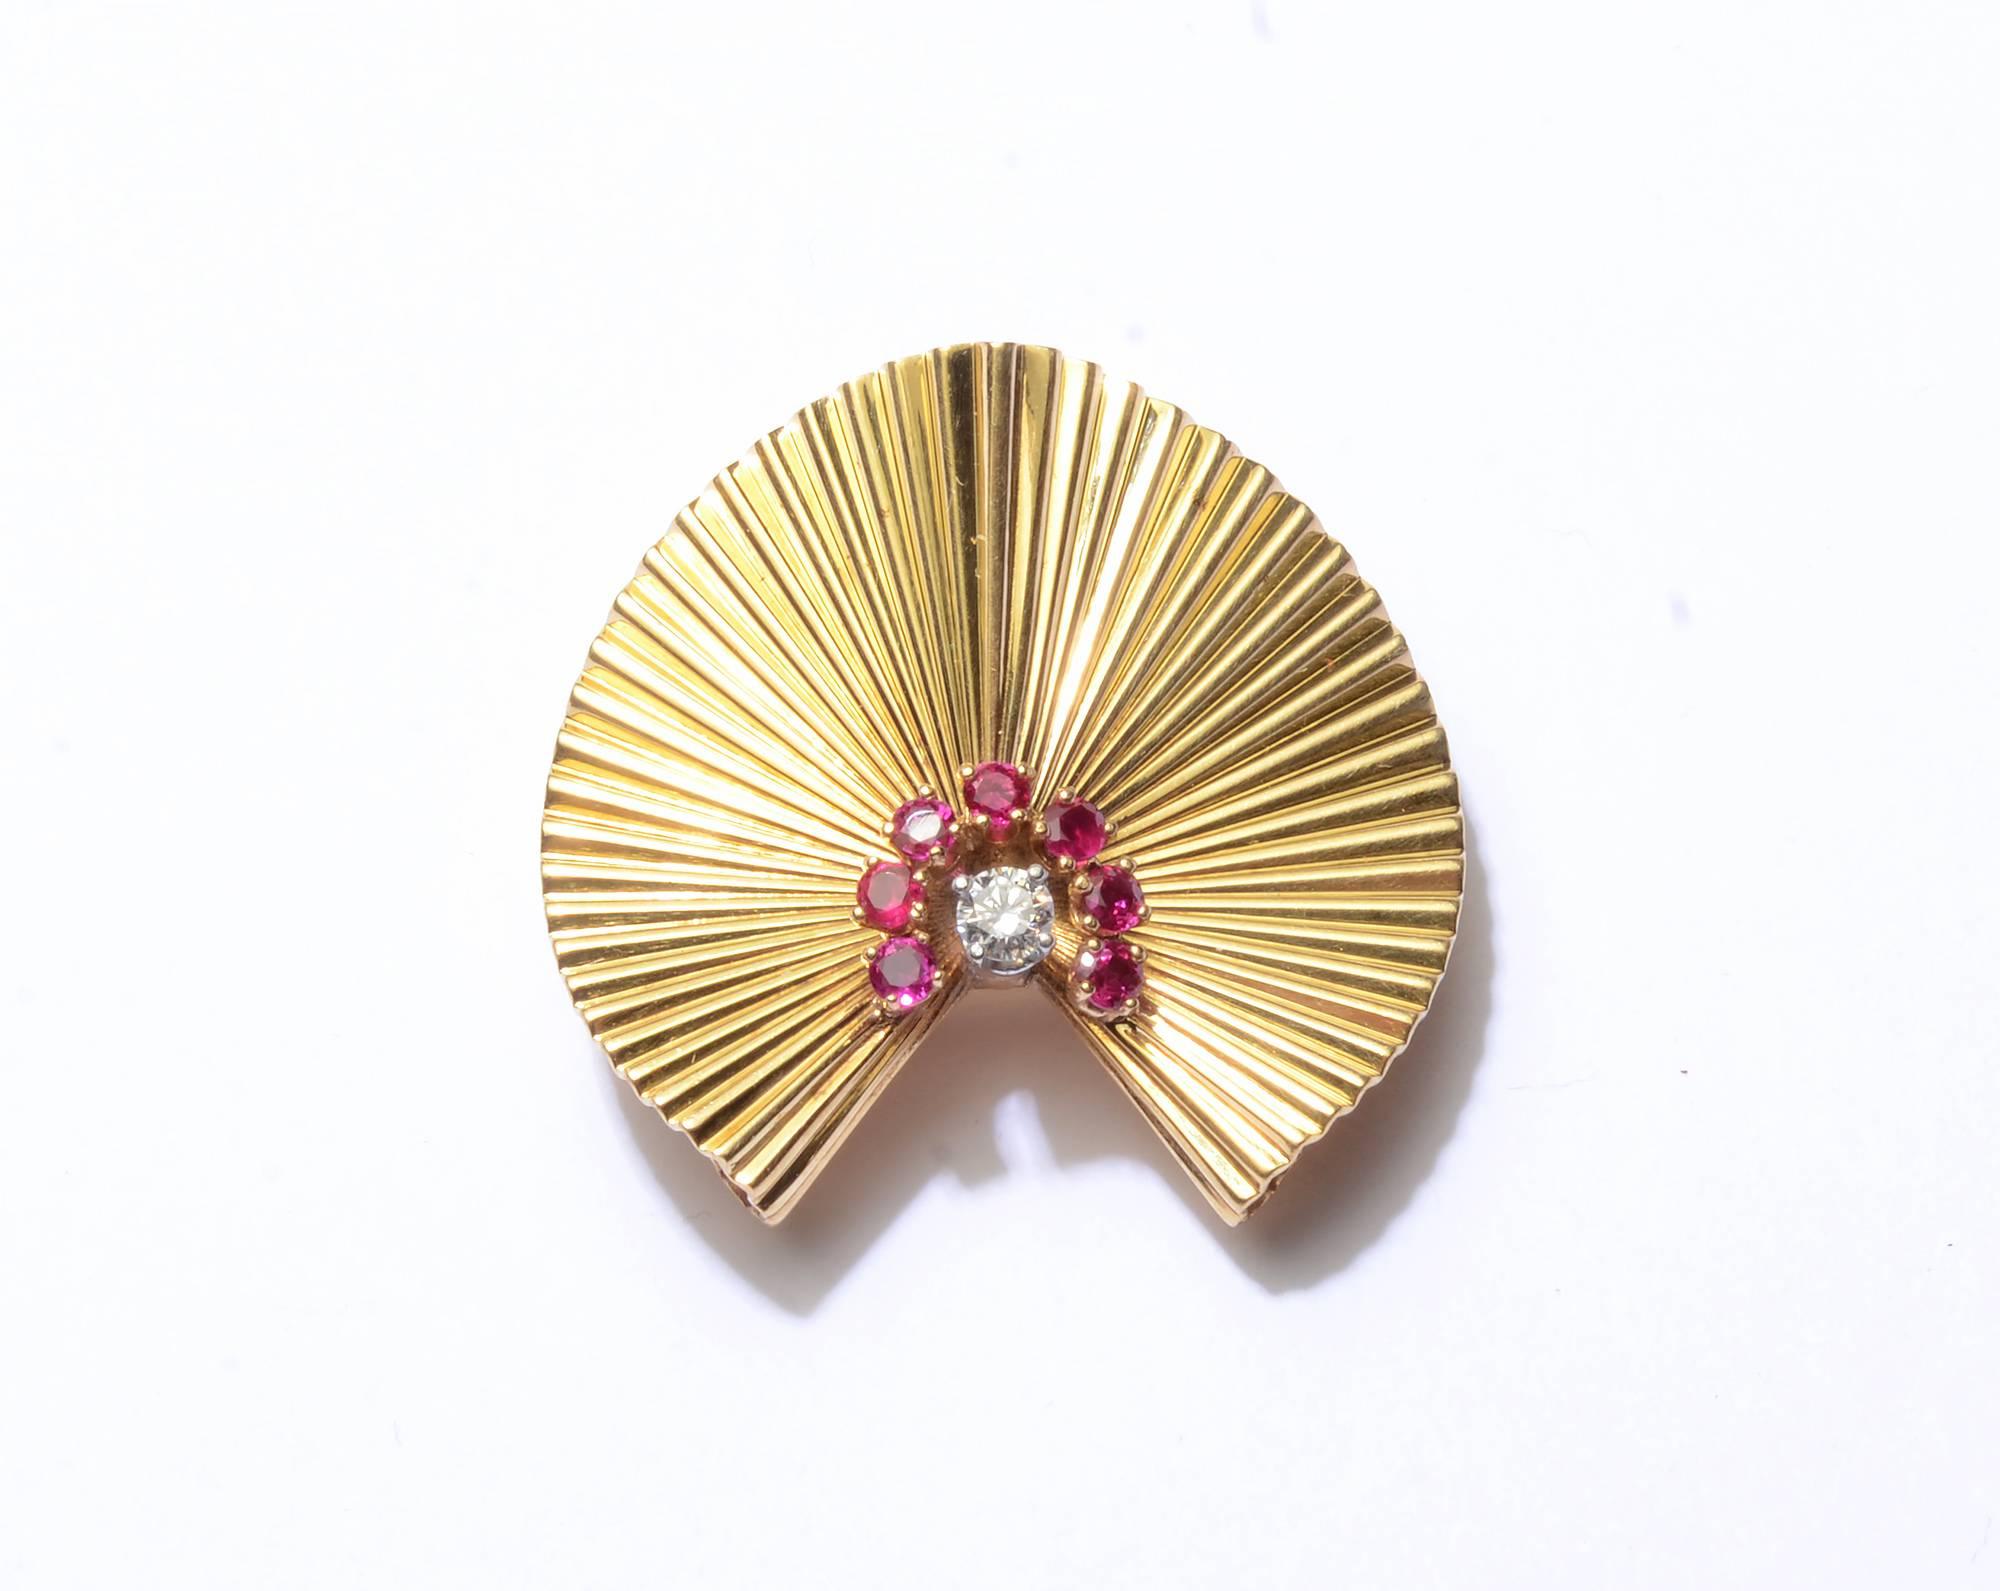 This gold and ruby  Retro brooch is especially graceful and versatile. The ribbed background is undulating giving a very 40's fans effect. The double pin stem indicates it is to be worn with the opening to the side but it is equally beautiful with